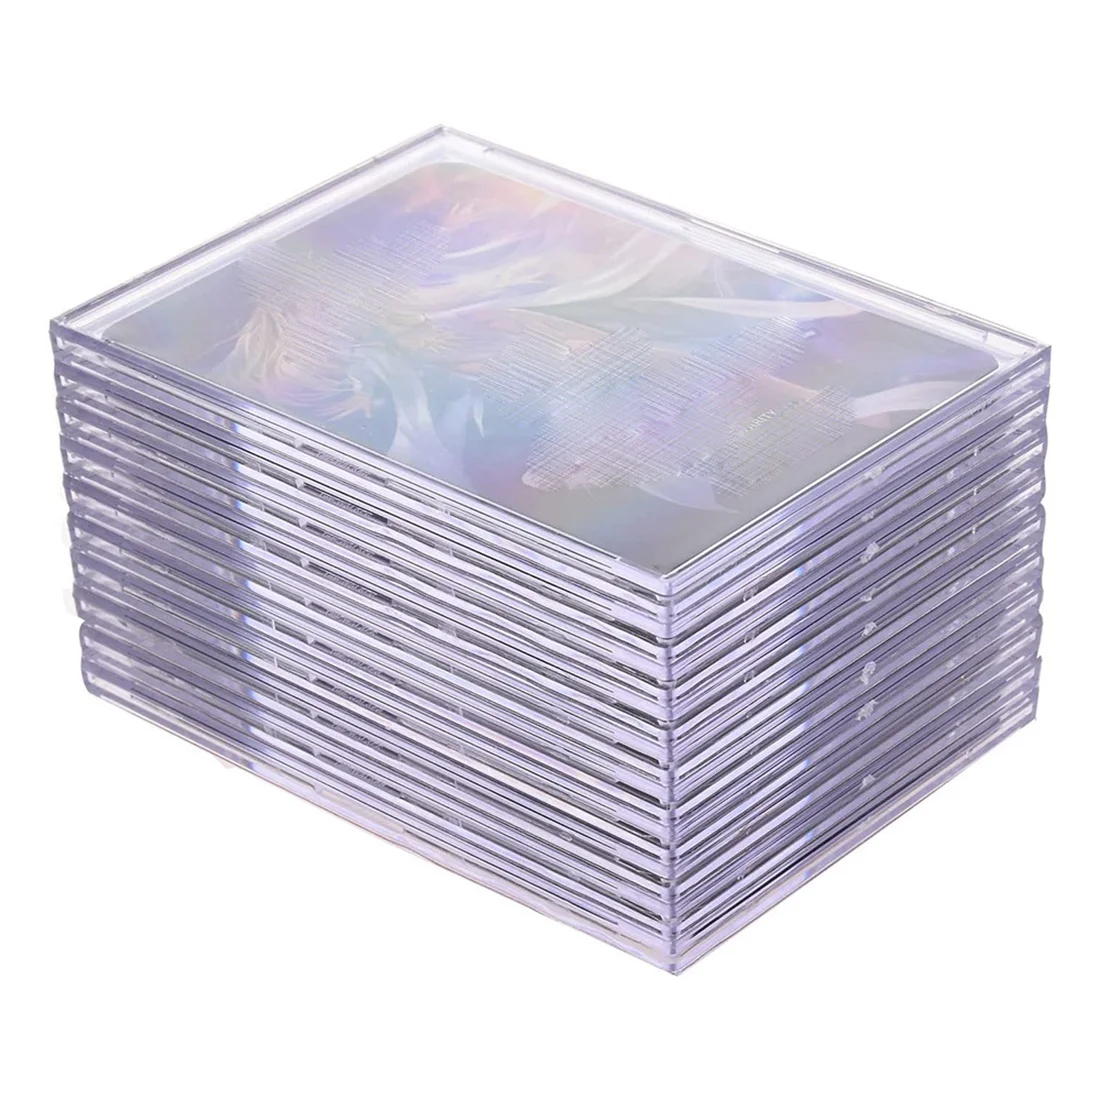 

Cards Sleeves Top Loaders 10 Hard Plastic Card Protector Clear Card Brick + 2 Display Stand